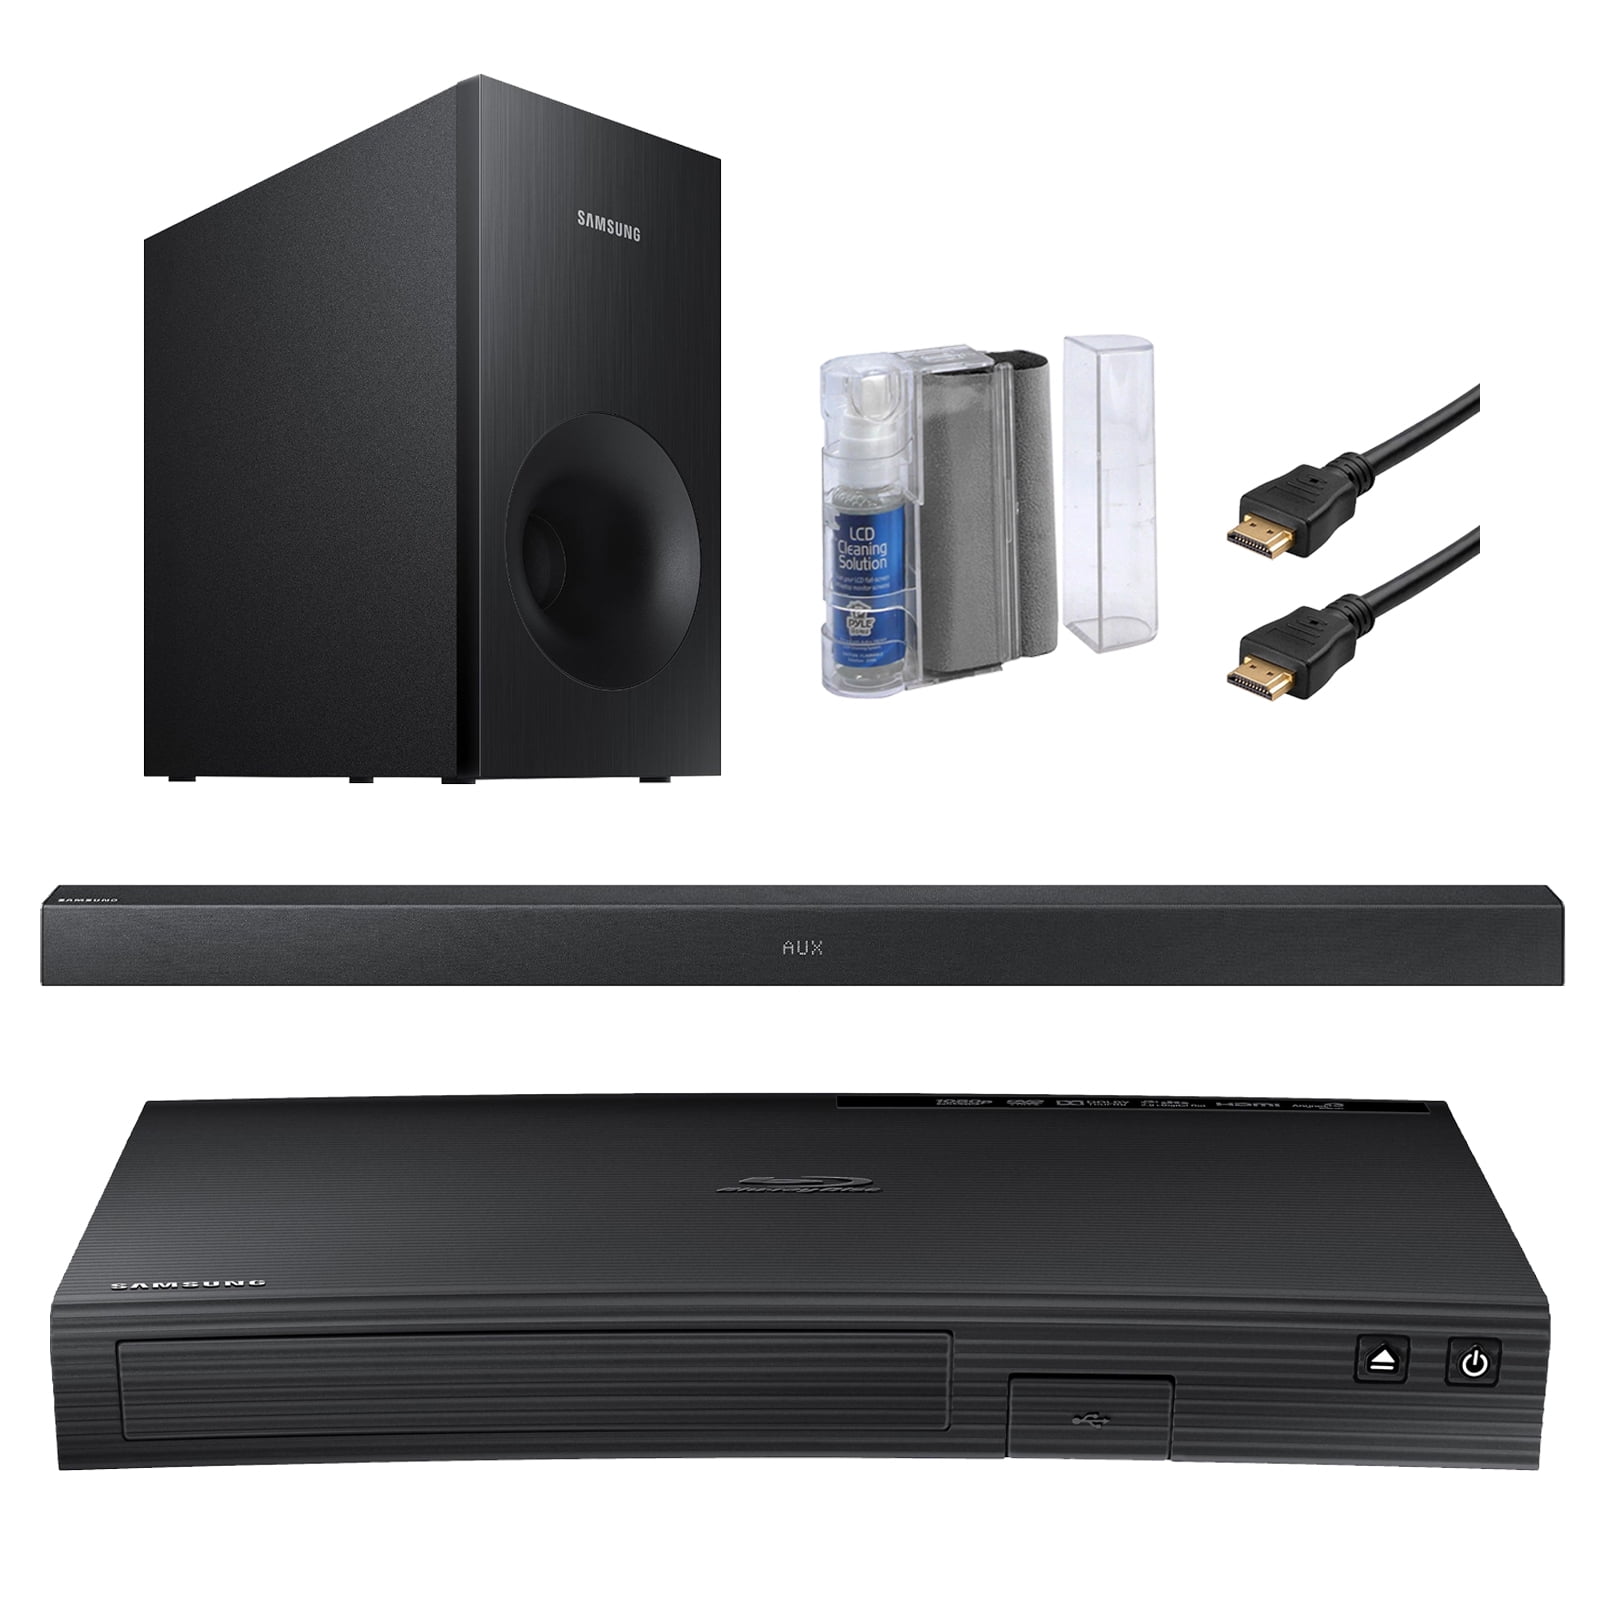 Samsung SBD-J5700 Curved Blu-ray CD DVD Player with WiFi - Bundle With 2.1 Channel 130 Watt Wireless Speaker + LCD Flat Screen / Eraser Cleaning Kit + 2x High Speed